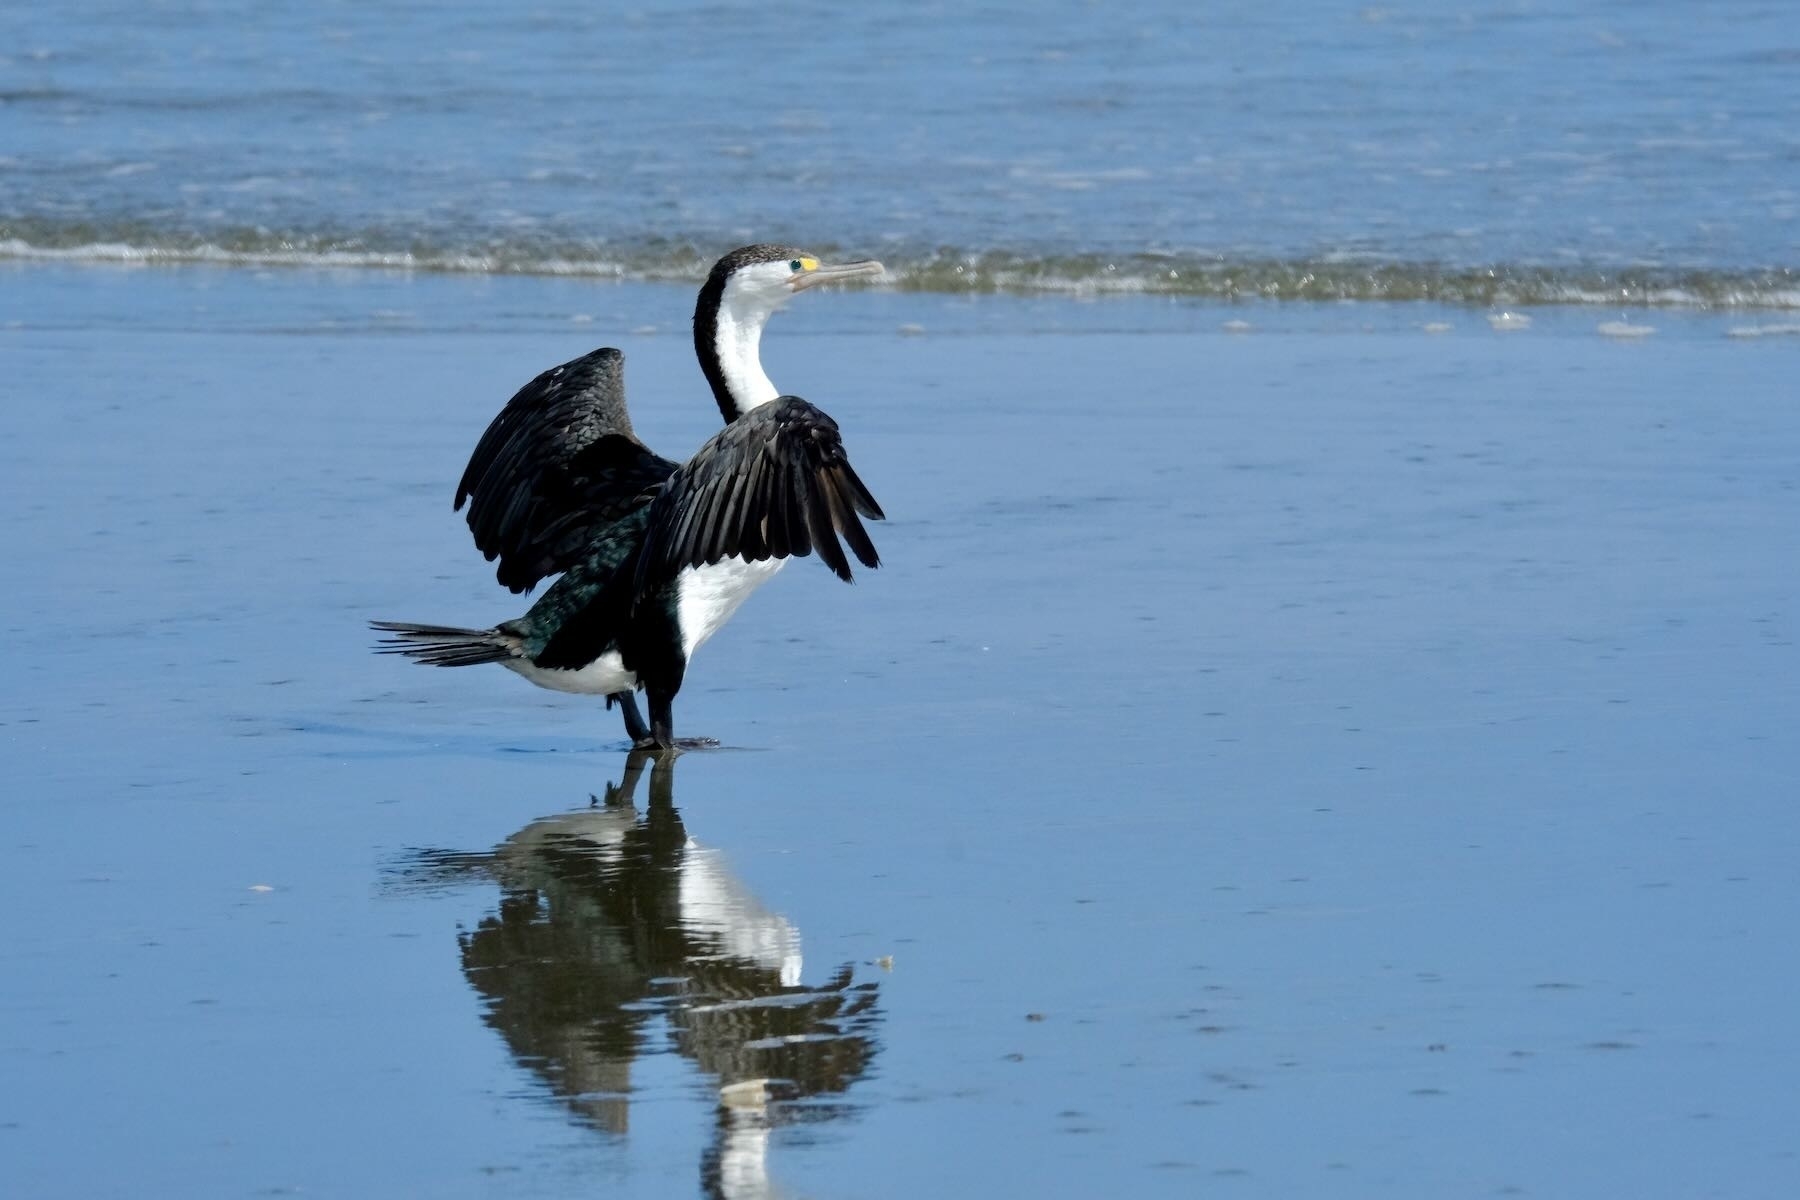 Large black and white shag with wings stretched, on wet sand. 